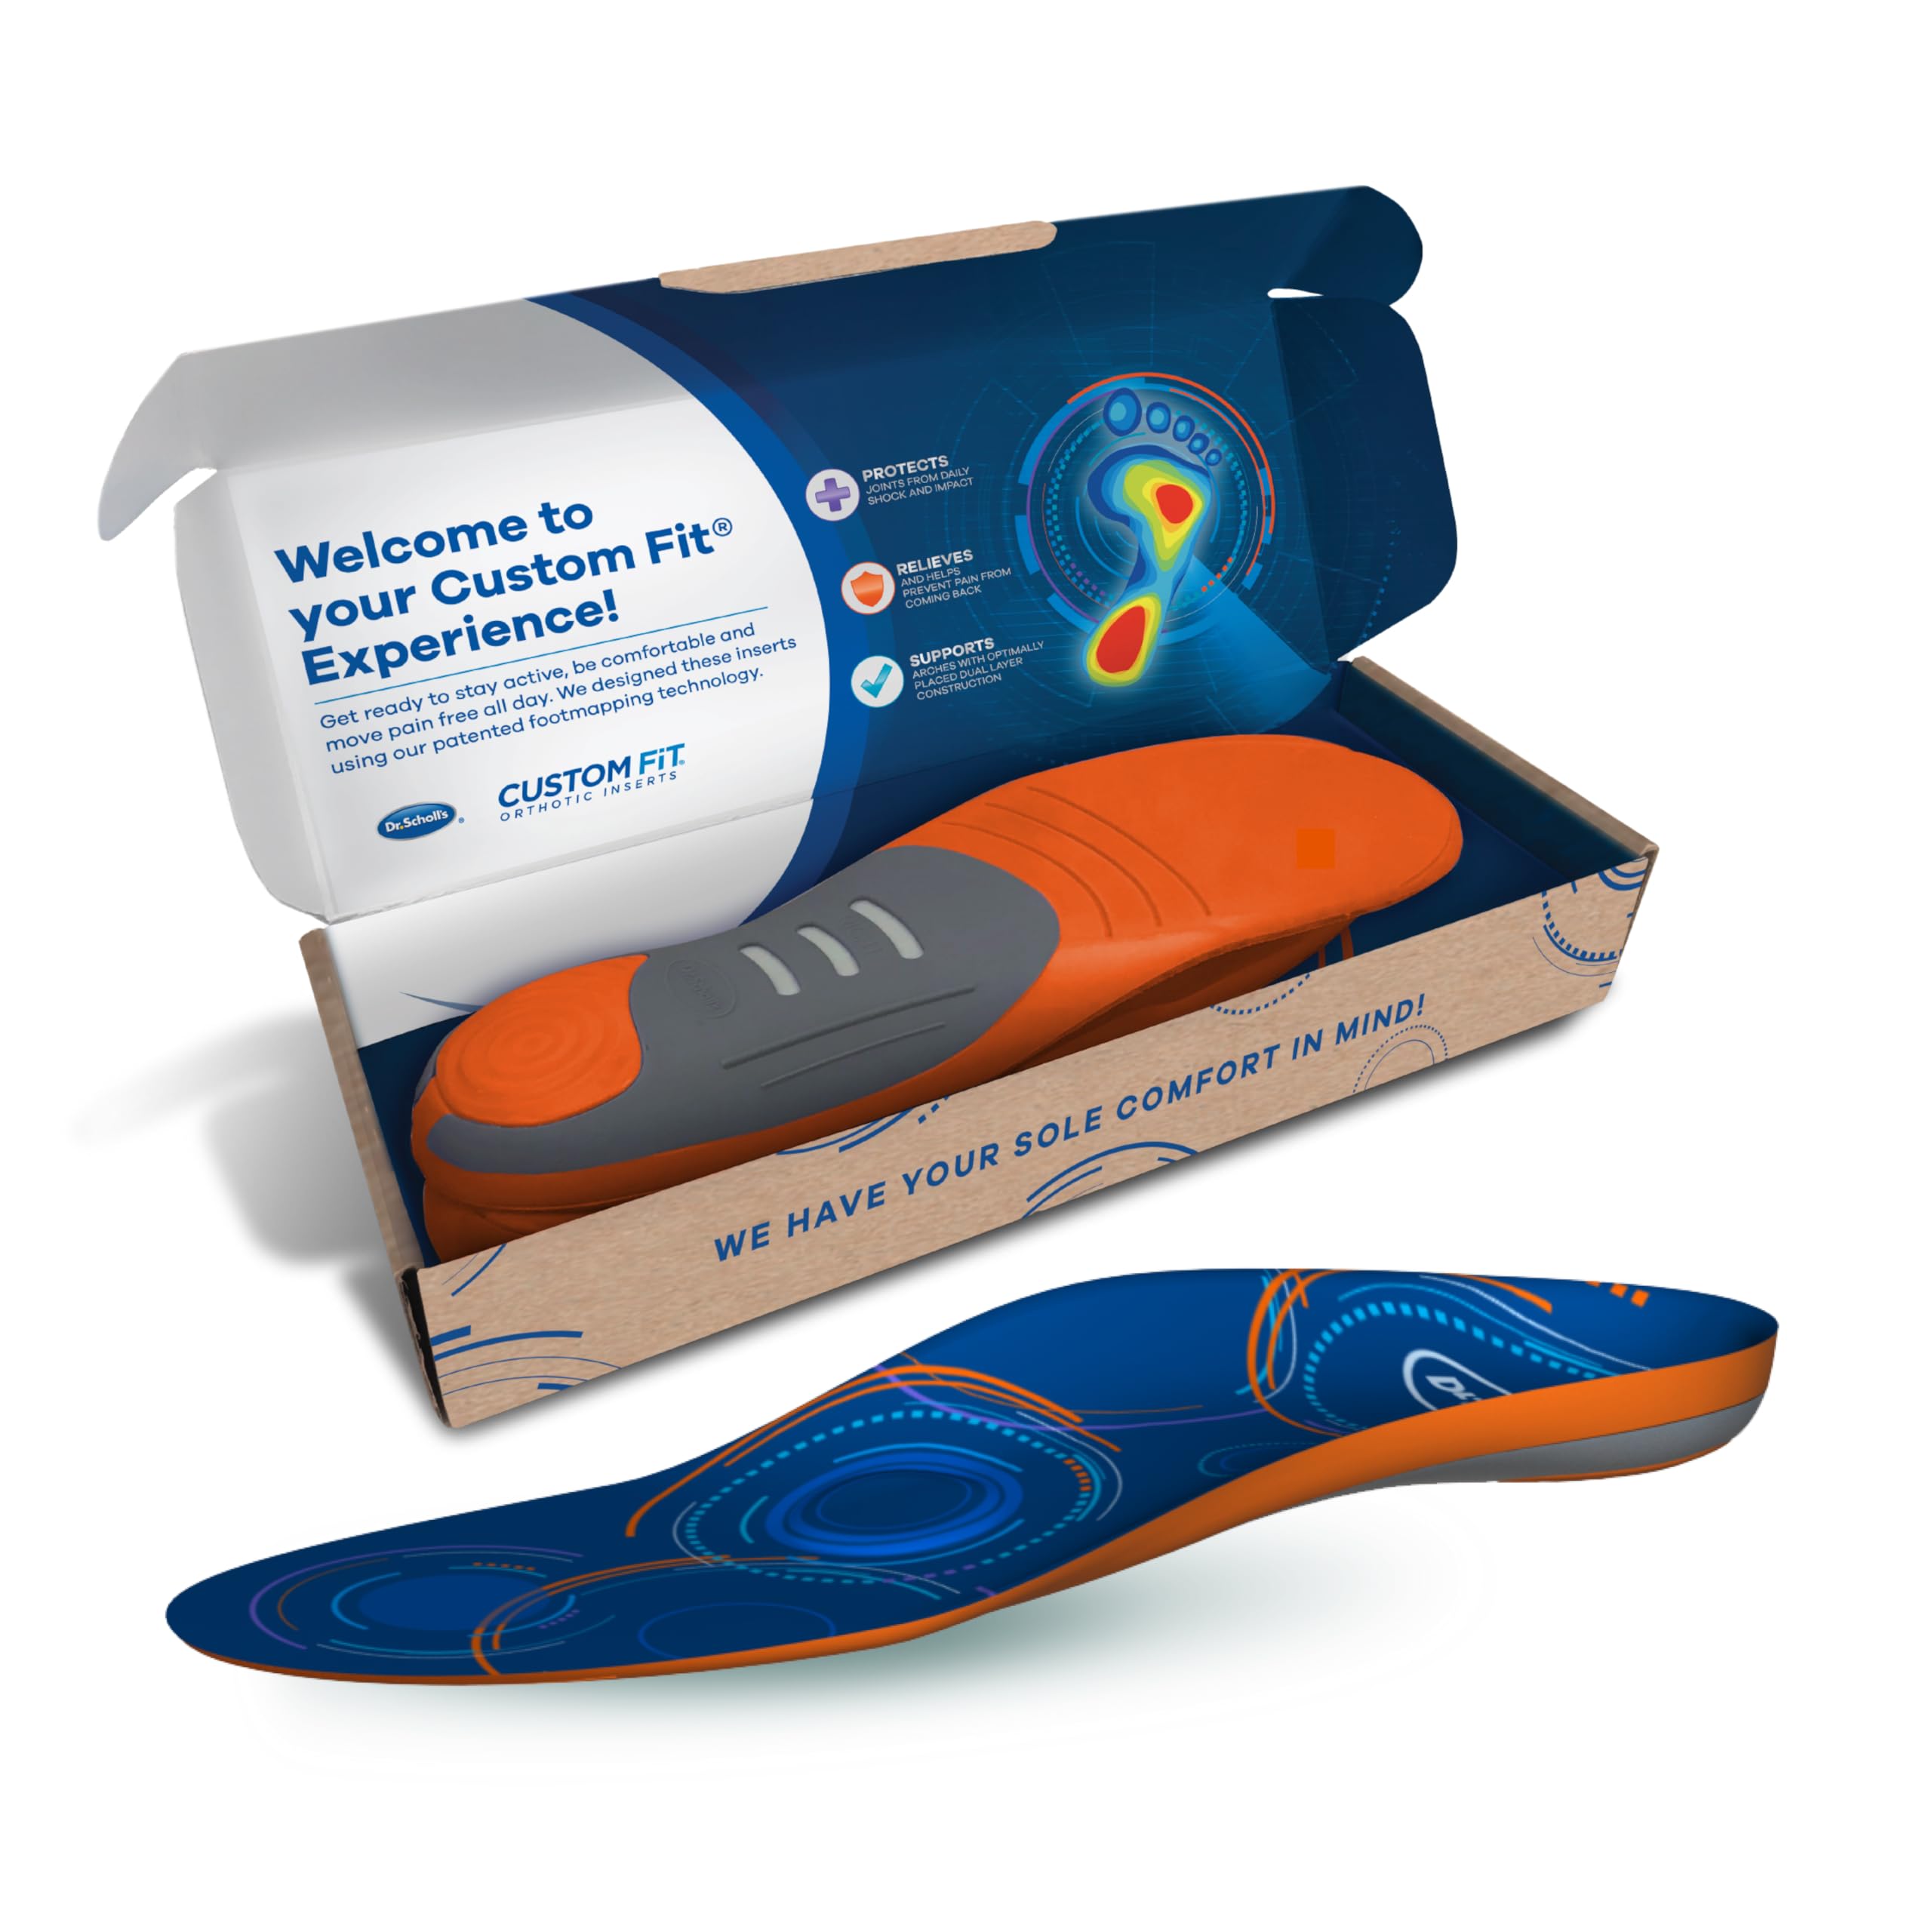 Dr. Scholl's Custom Fit Orthotics 3/4 Length Inserts, CF 780, Customized for Your Foot & Arch, Immediate All-Day Pain Relief, Lower Back, Knee, Plantar Fascia, Heel, Insoles Fit Men & Womens Shoes